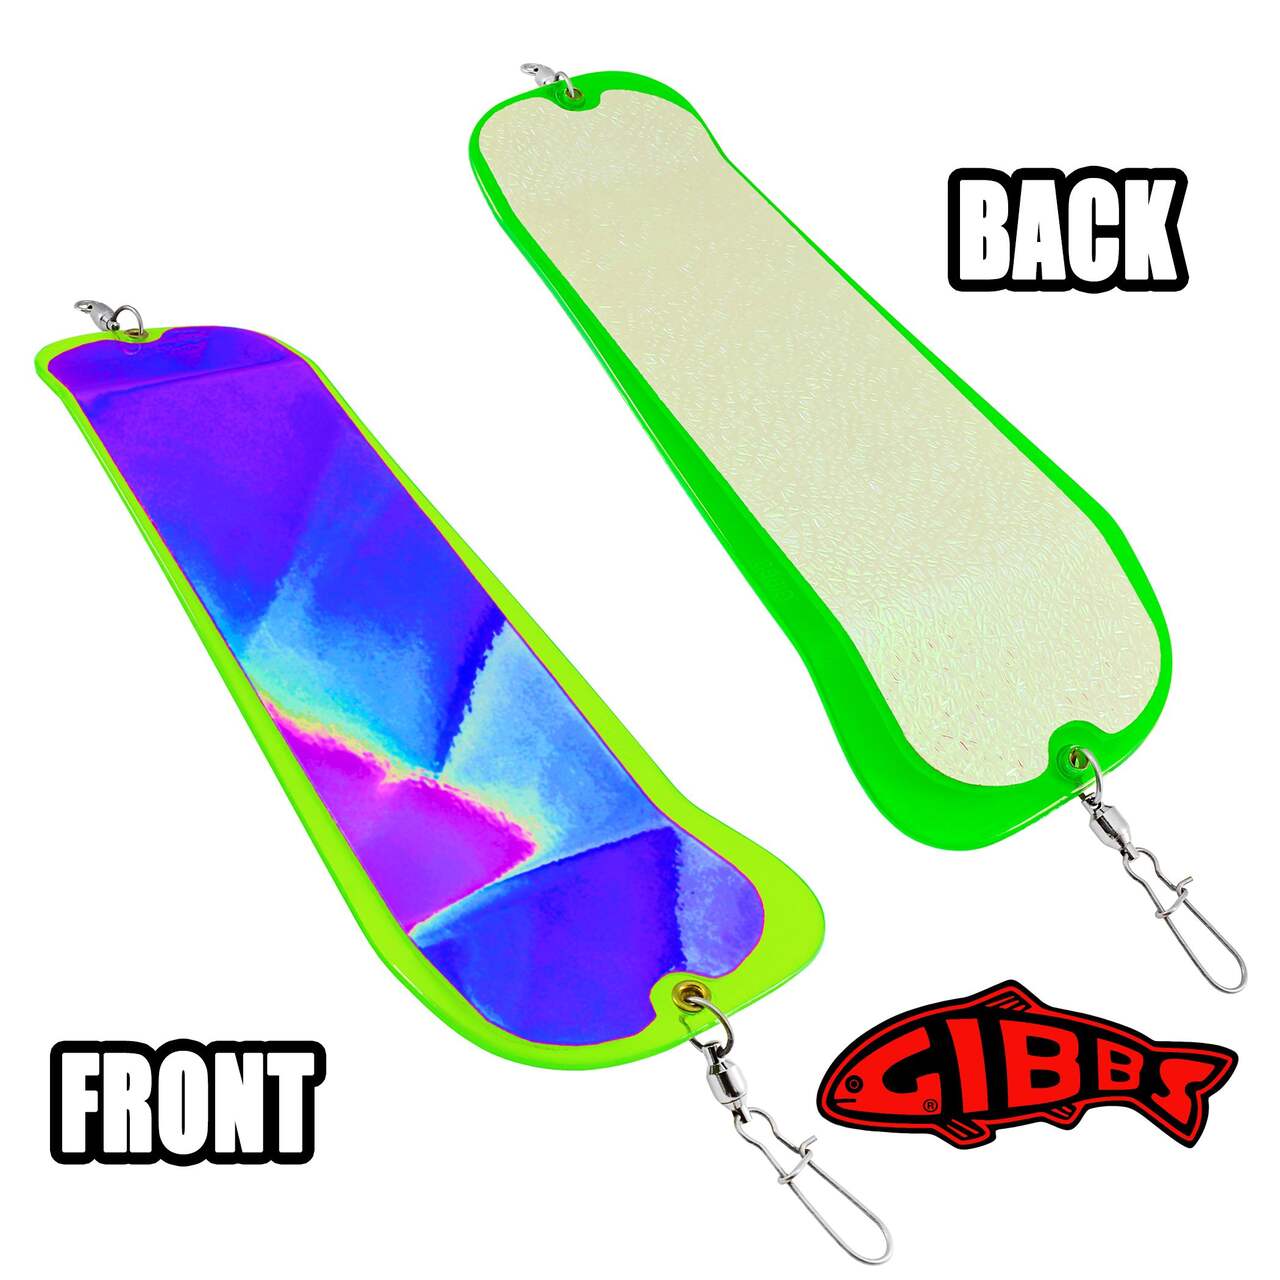 https://media-www.canadiantire.ca/product/playing/fishing/fishing-lures/0777241/recoded-to-6775382-2ef7f237-9bb4-4c44-a00d-b013bf9020e1-jpgrendition.jpg?imdensity=1&imwidth=1244&impolicy=mZoom